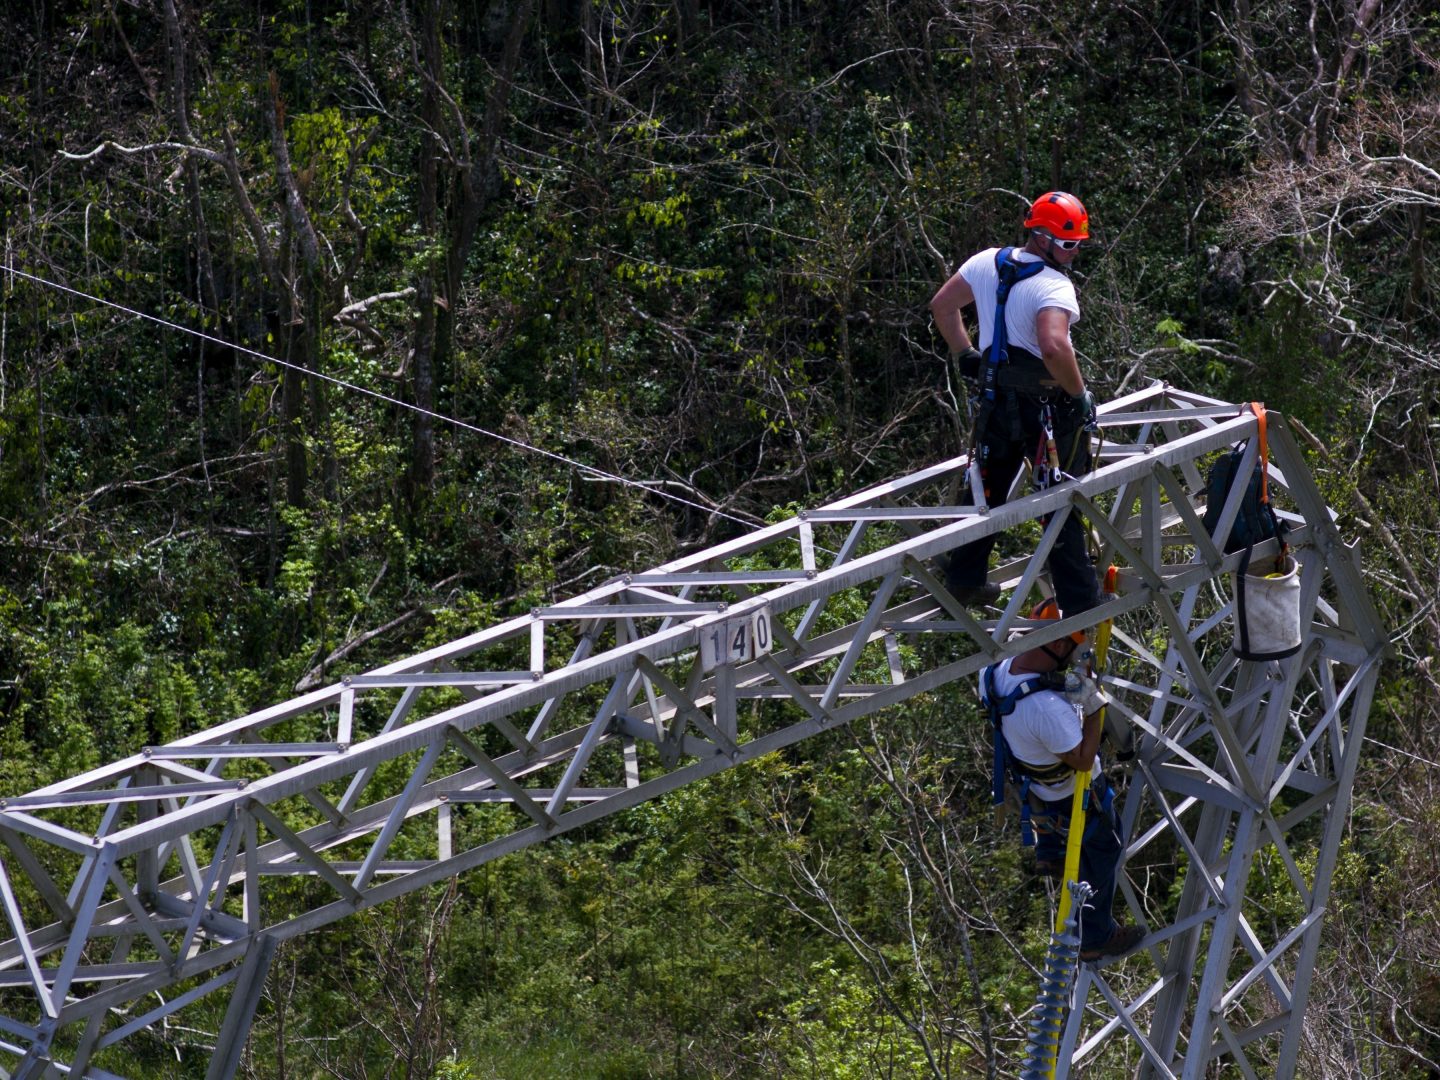 FILE - In this Sunday, Oct. 15, 2017, file photo, Whitefish Energy Holdings workers restore power lines damaged by Hurricane Maria in Barceloneta, Puerto Rico. A year after losing a $300 million no-bid contract to restore Puerto Rico's hurricane-shattered electric grid, Whitefish Energy Holdings has quietly been seeking and winning U.S. government contracts. (AP Photo/Ramon Espinosa, File)